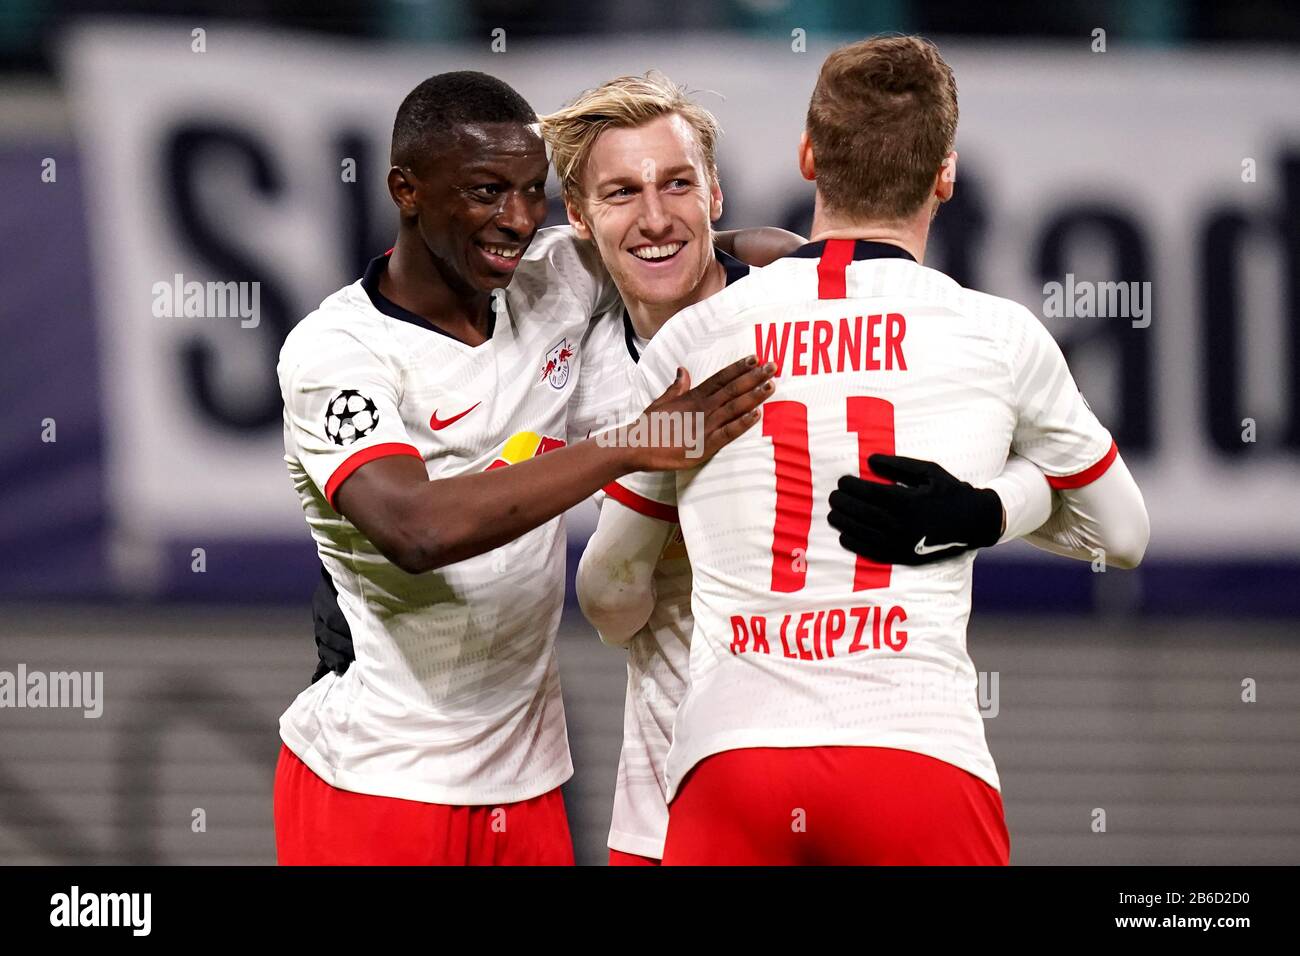 RB Leipzig's Emil Forsberg (centre) celebrates scoring his sides third goal of the game with teammates during the UEFA Champions League round of 16 second leg match at the Red Bull Arena, Leipzig. Stock Photo